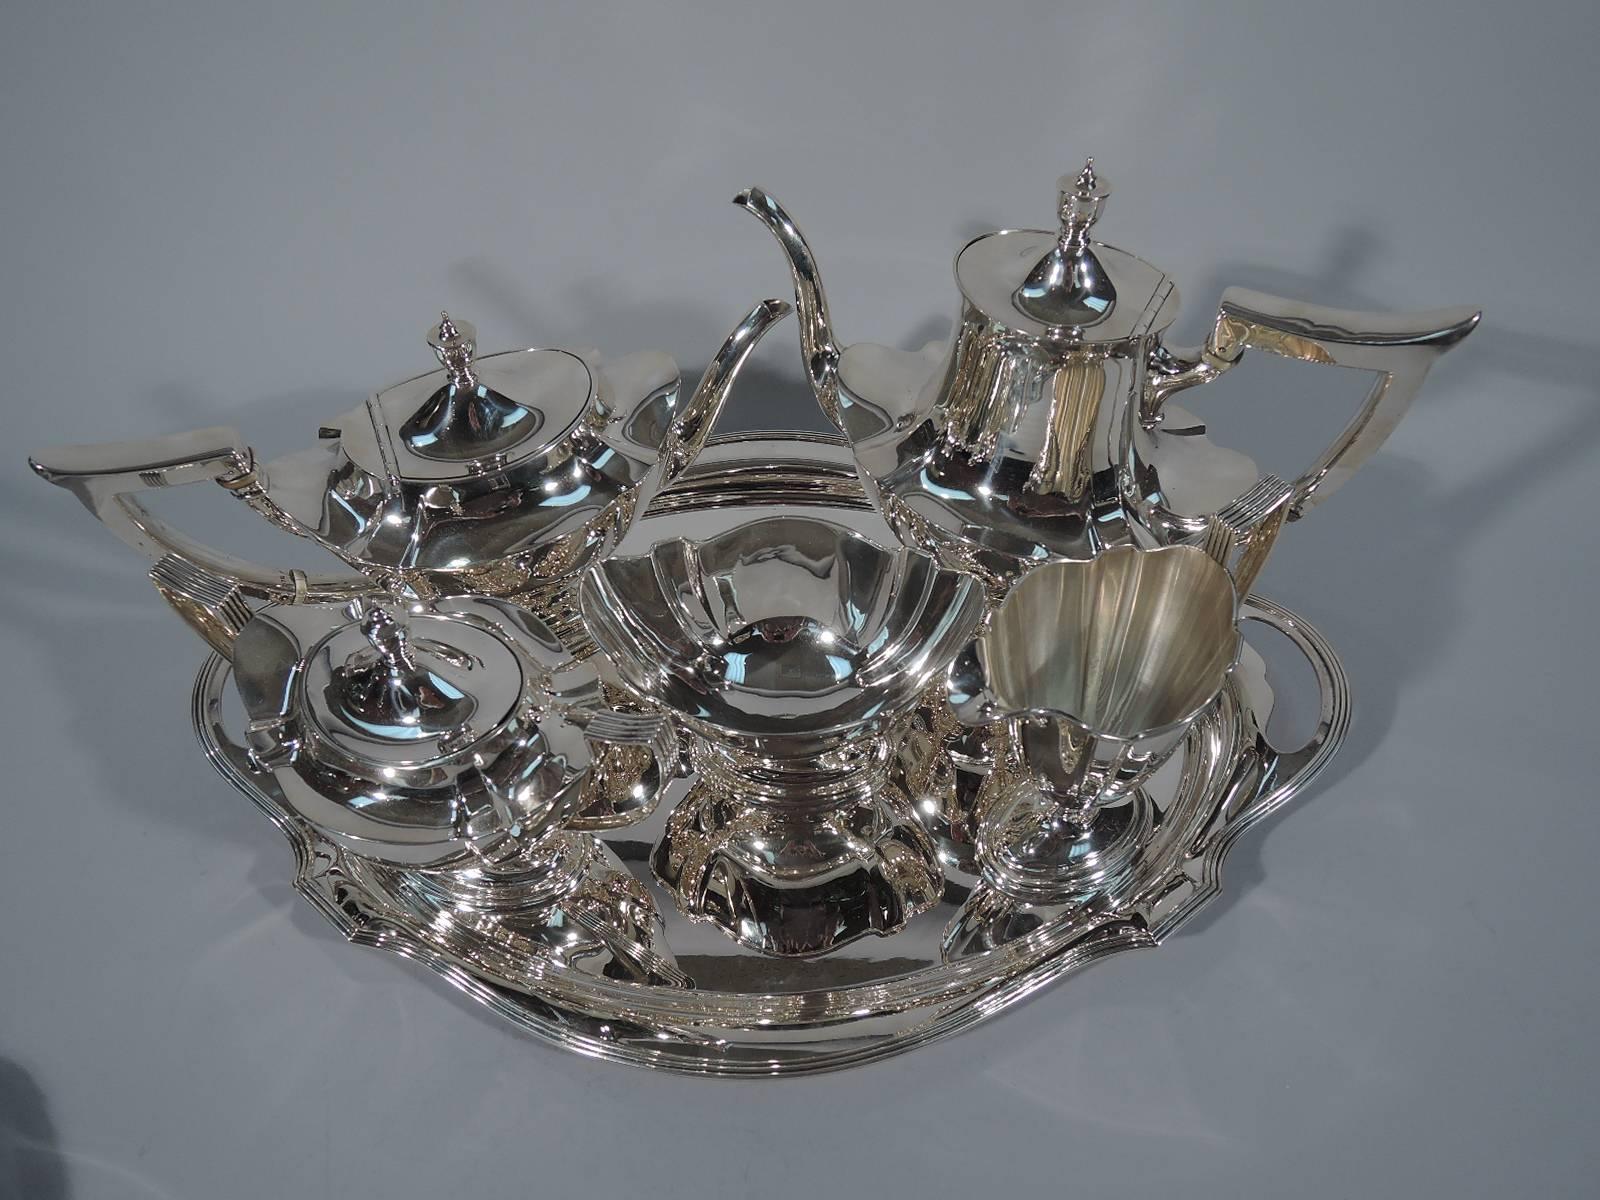 Sterling silver tea and coffee set in Plymouth pattern. Made by Gorham in Providence in 1919. This set comprises teapot, coffeepot, creamer, sugar and waste bowl on tray.

Each: curved and paneled body, stepped oval foot, reeded rim, scroll